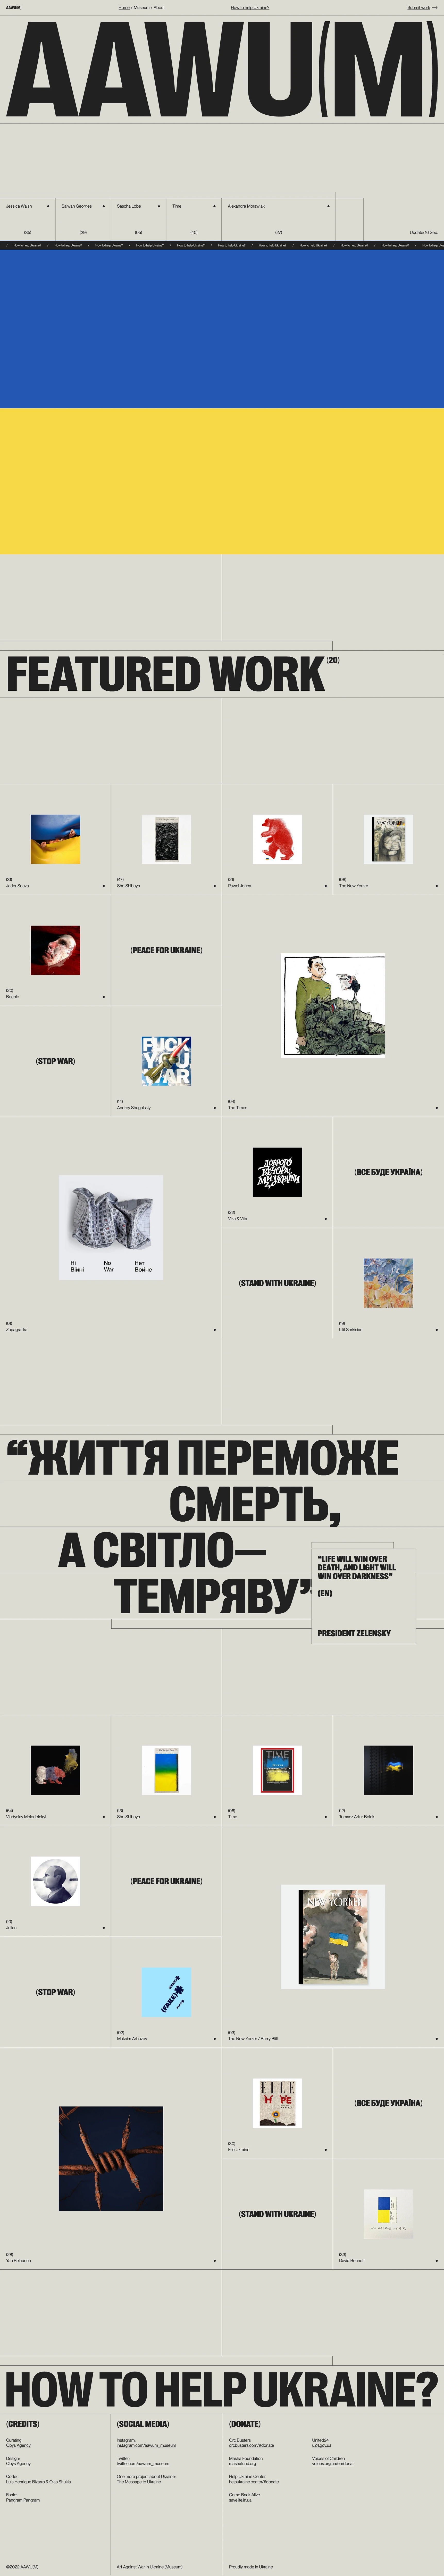 AAWU(M) Landing Page Example: This museum is a collection of the best pieces of art. fashion, graphic design, 3D. NFT. motion and all kinds of design and art related to the war in Ukraine.